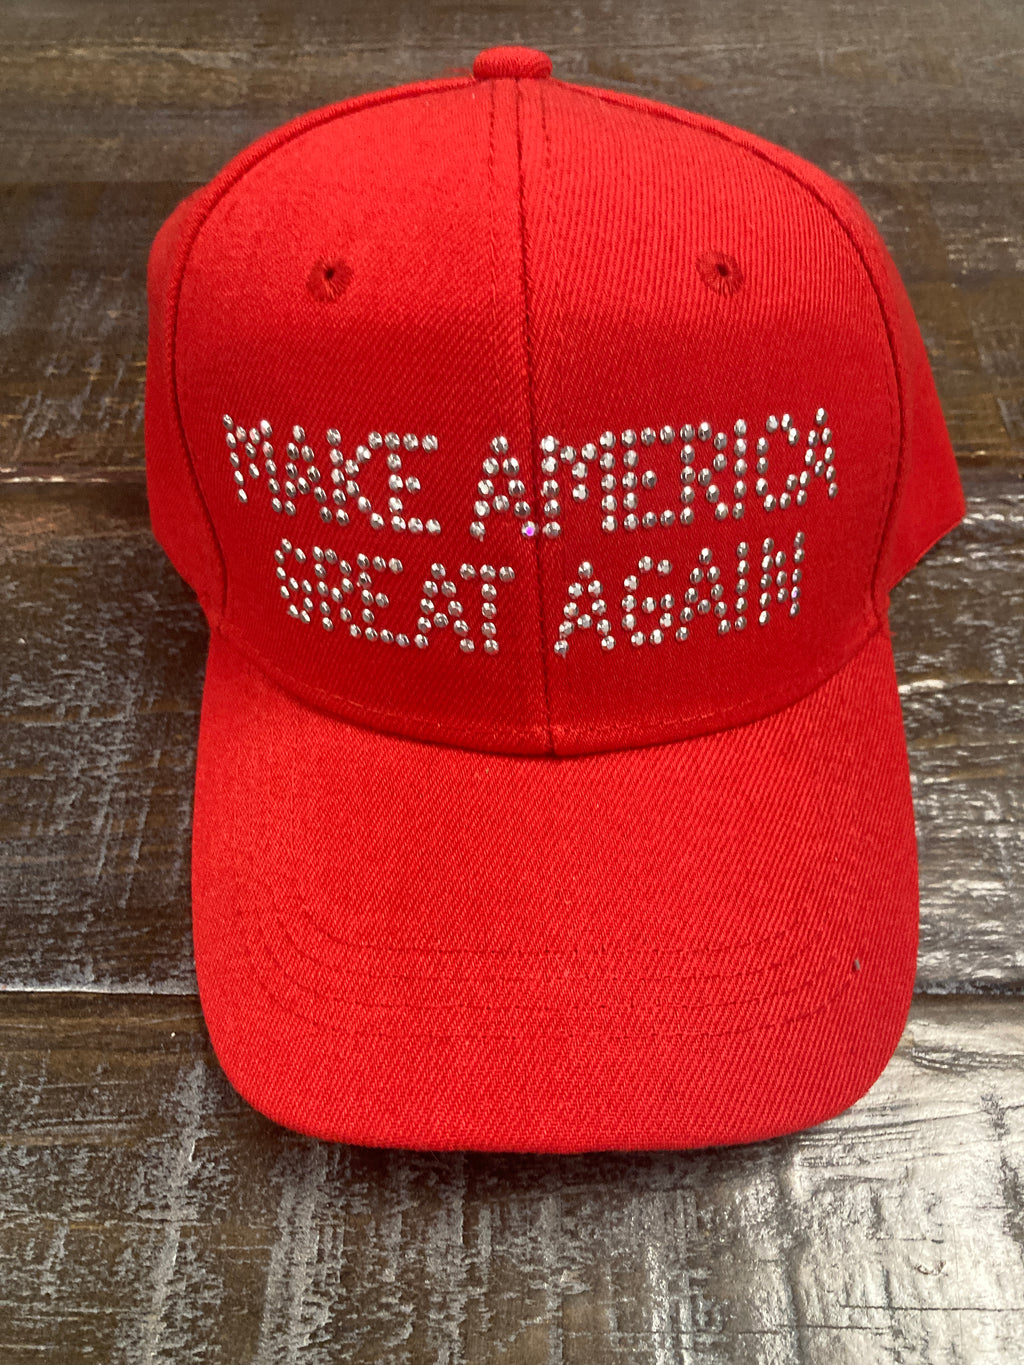 "Make America Great Again" Red Bedazzled Hat